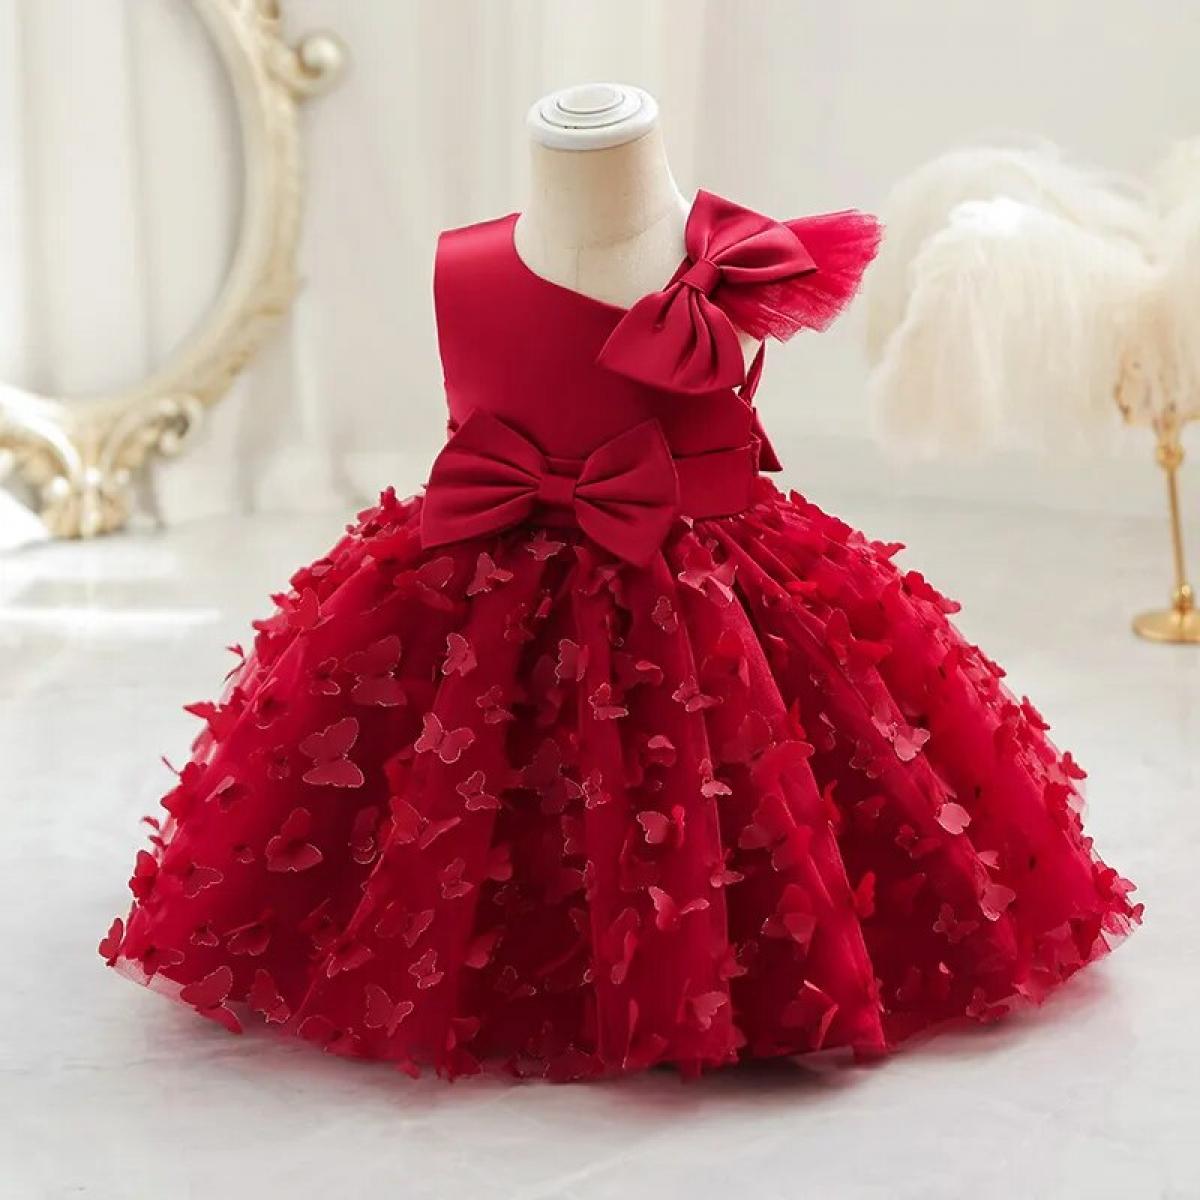 High End New 1 6t Baby Birthday Butterfly Petal Party Dress Toddler Cute Baby Girl Off The Shoulder Wedding Party Dress